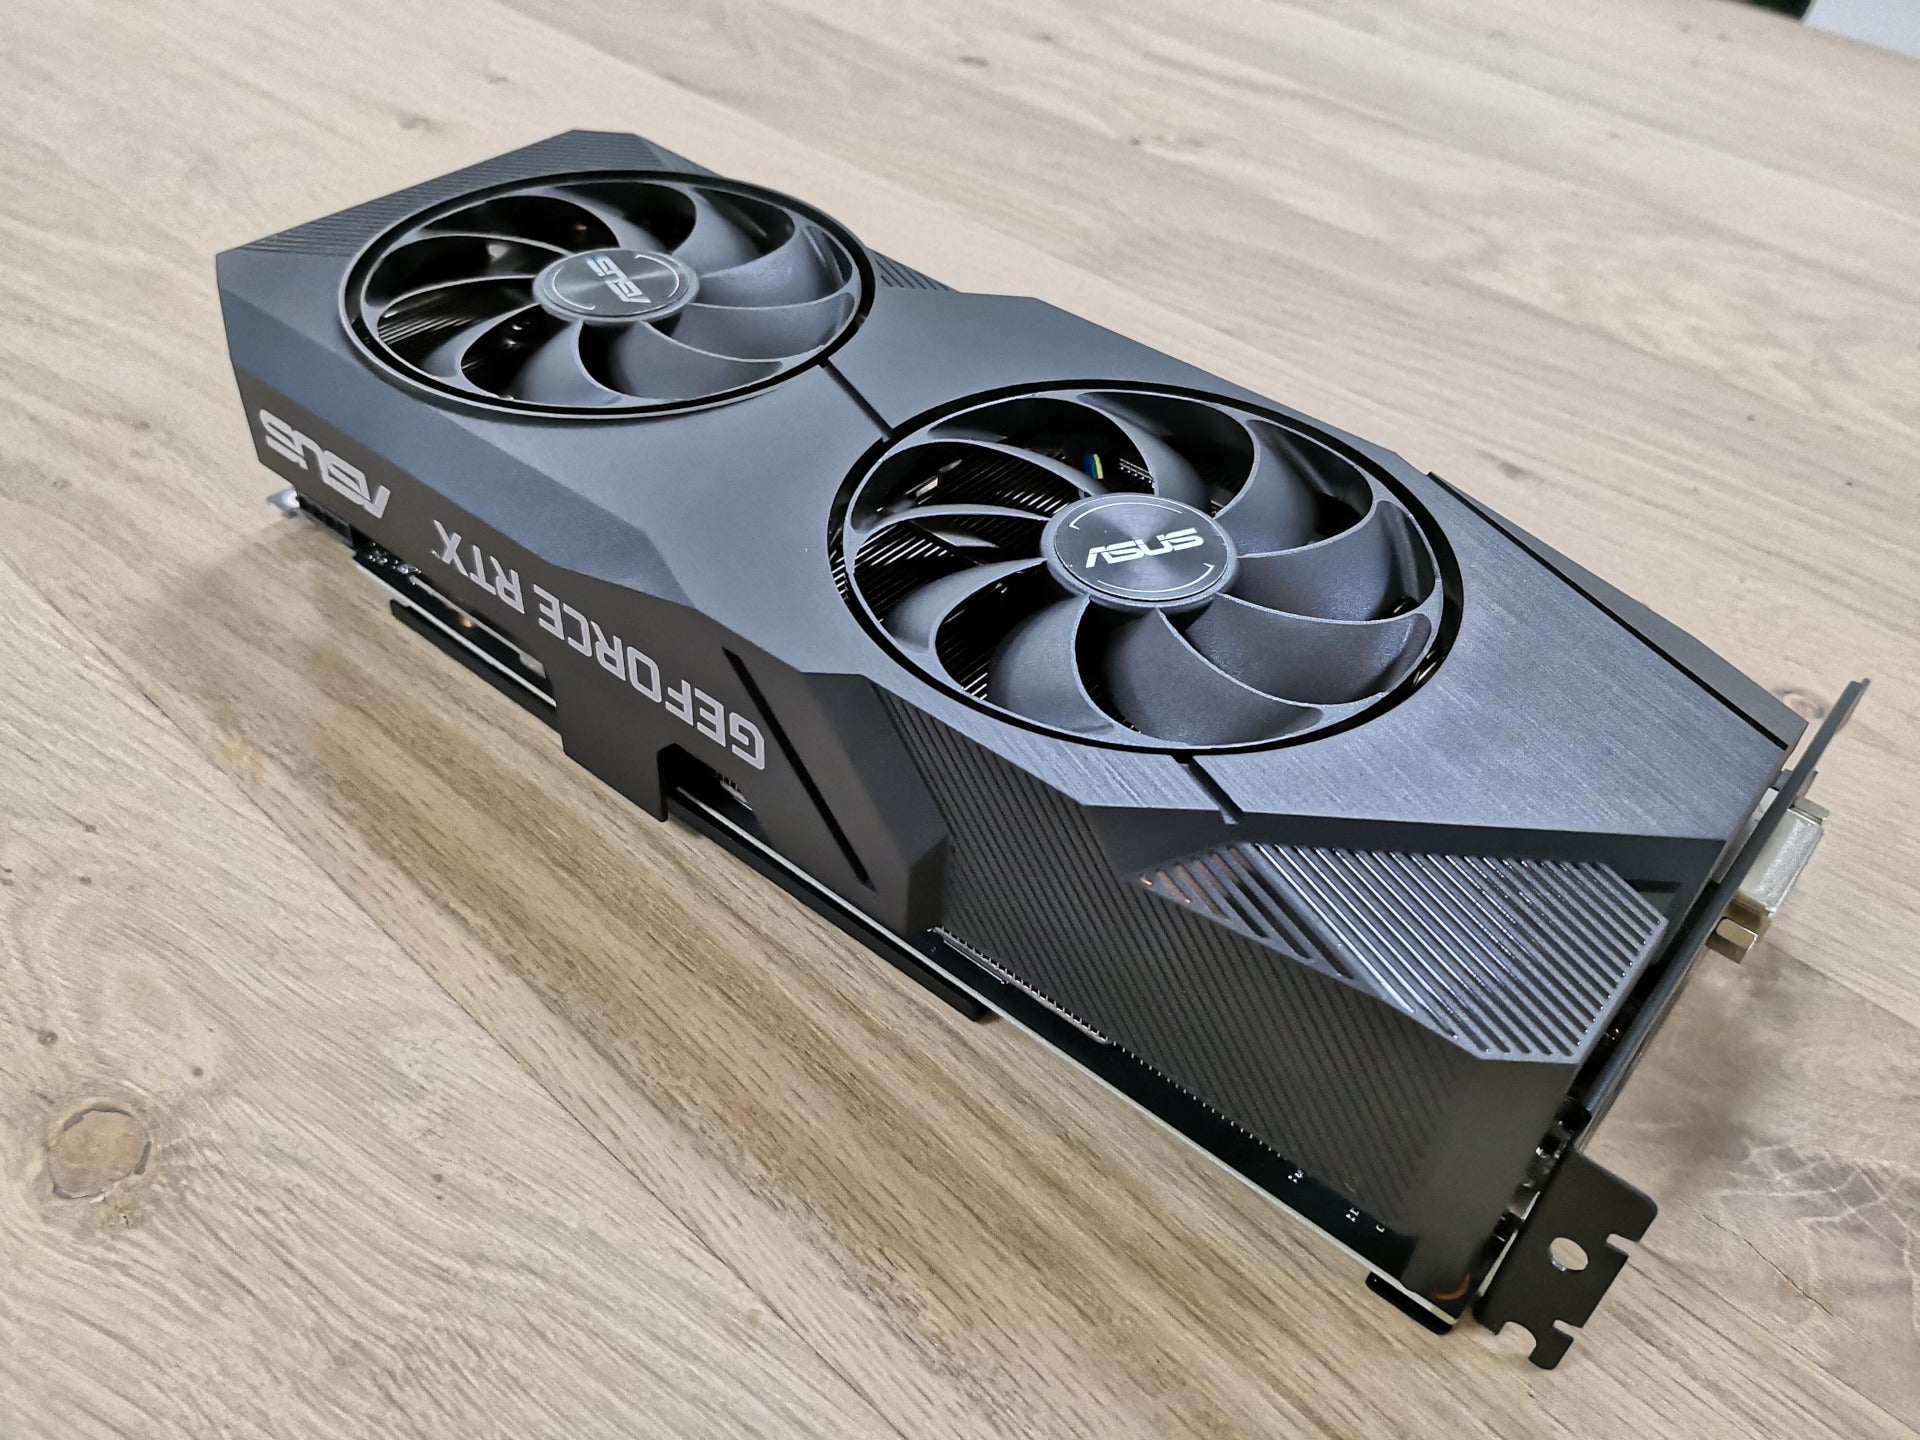 Asus Dual RTX 2060 Super Review | Trusted Reviews